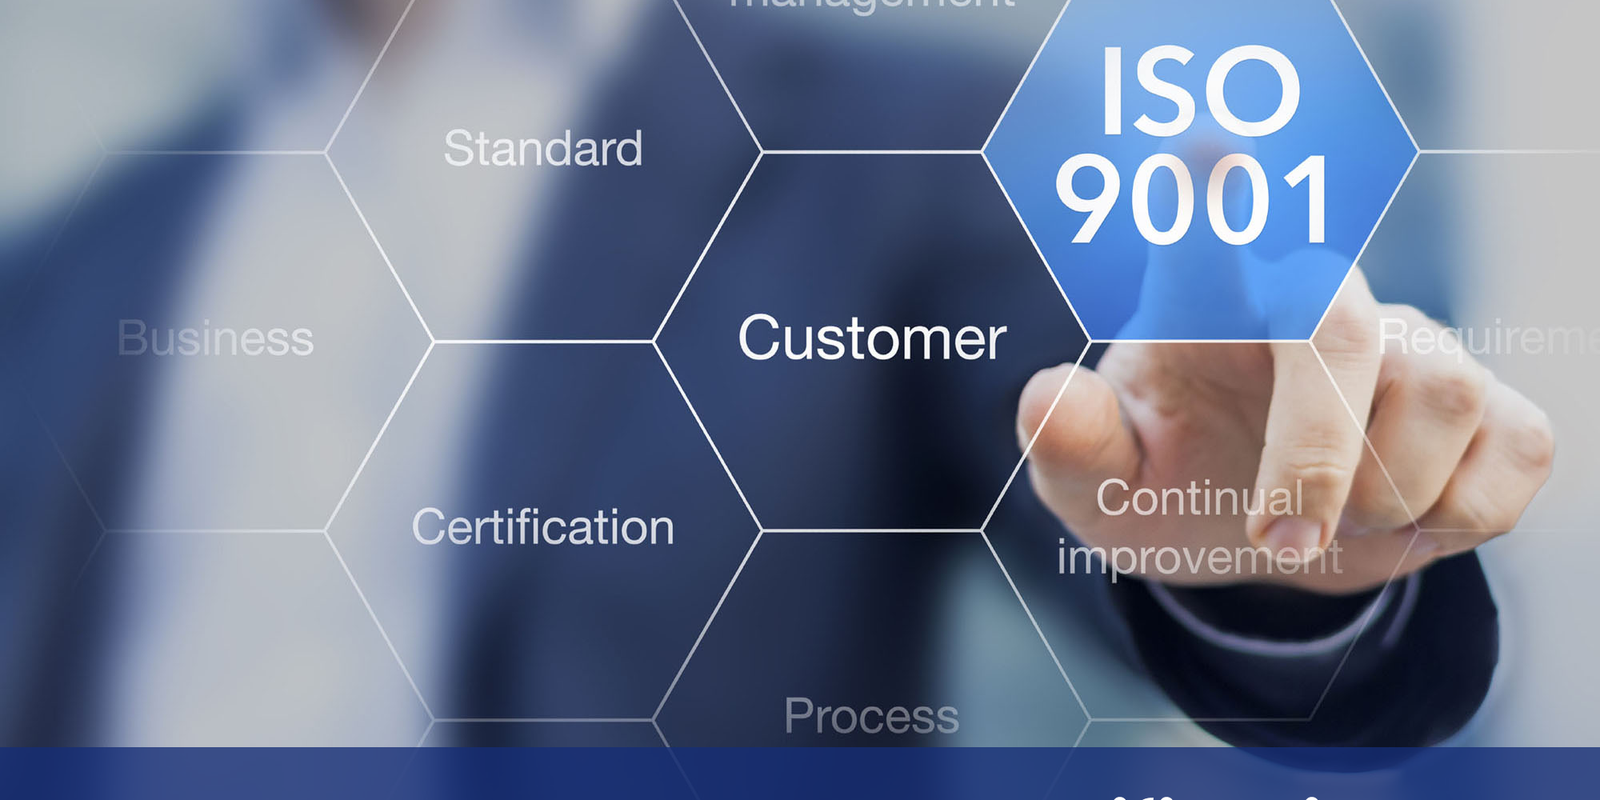 How to Get ISO 9001 Certification